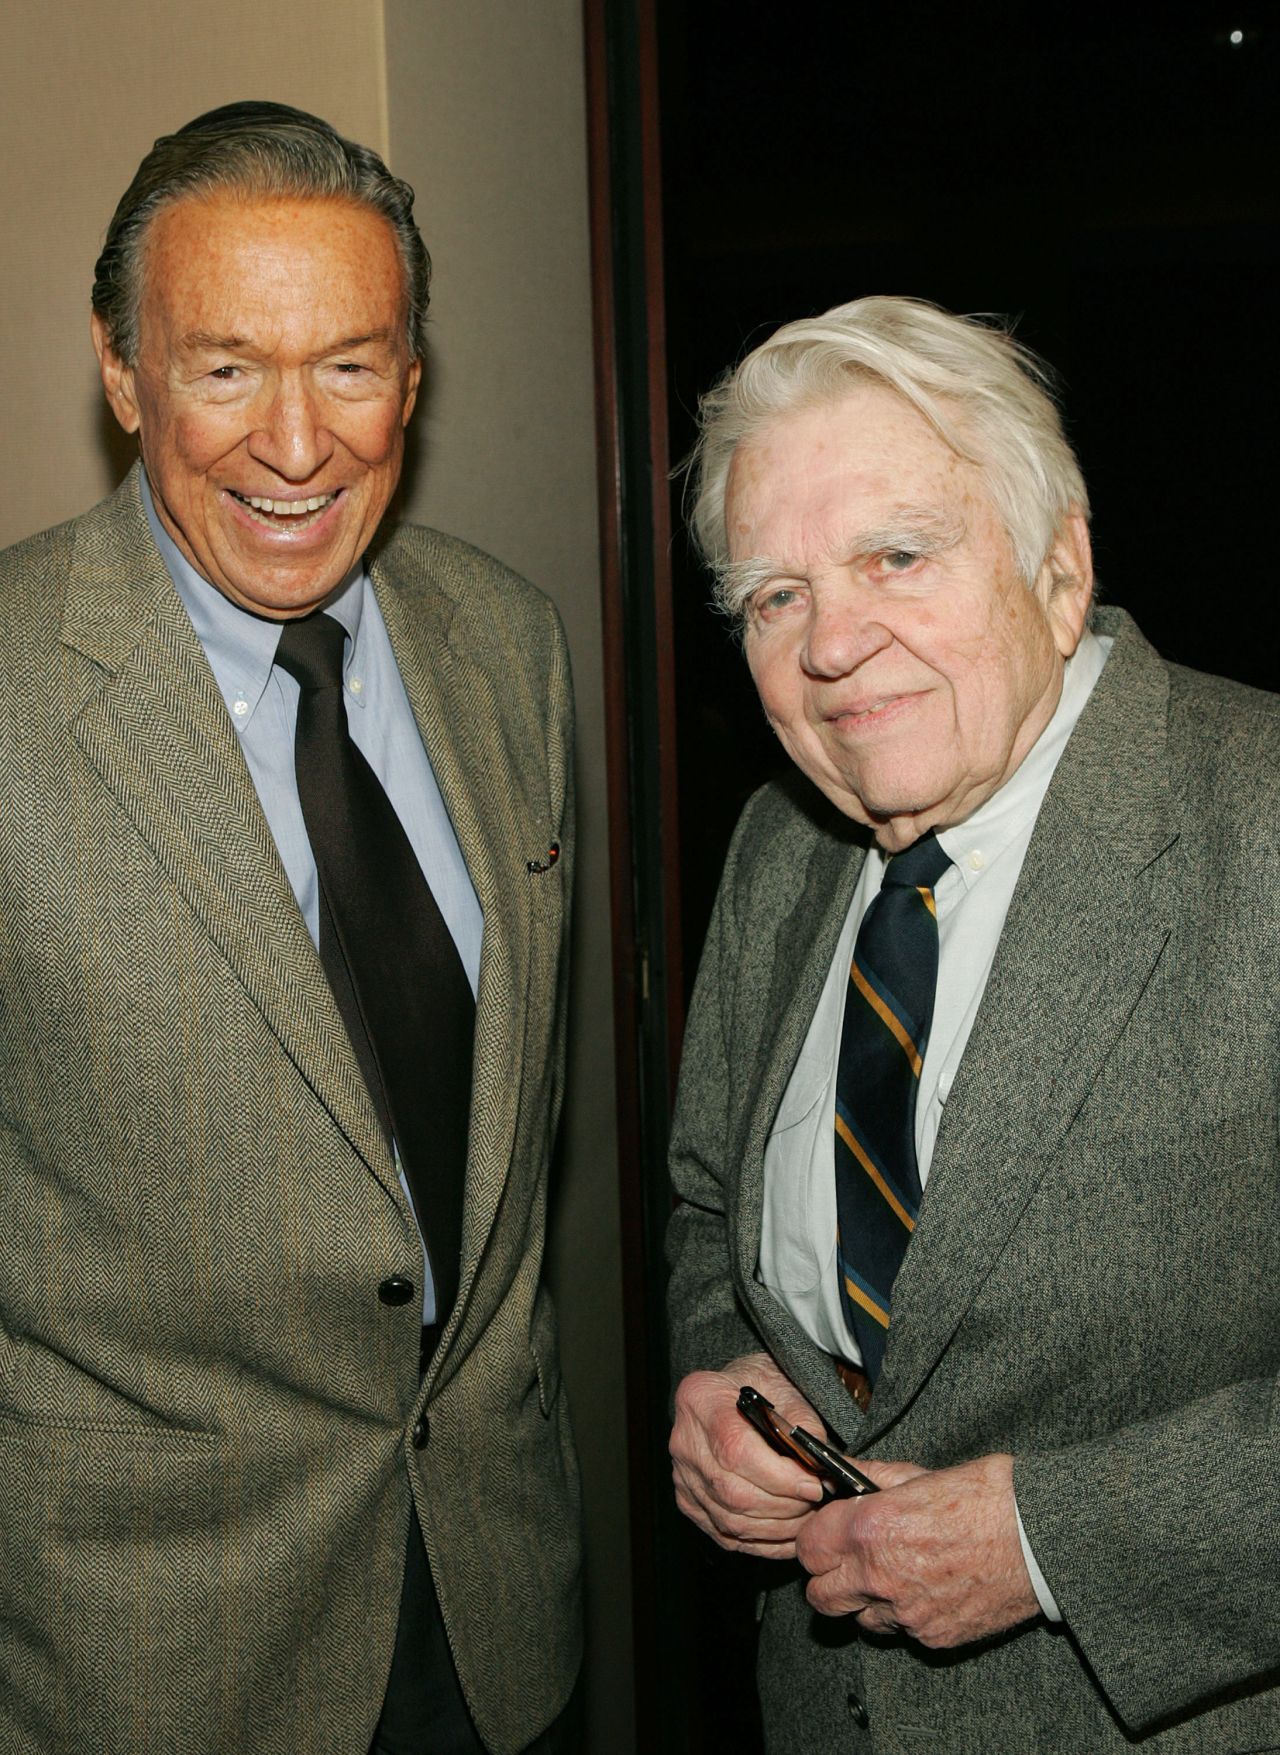 Wallace and and fellow "60 Minutes" correspondent Andy Rooney attend a 2005 screening of "Enron: The Smartest Guys in the Room" in New York. 